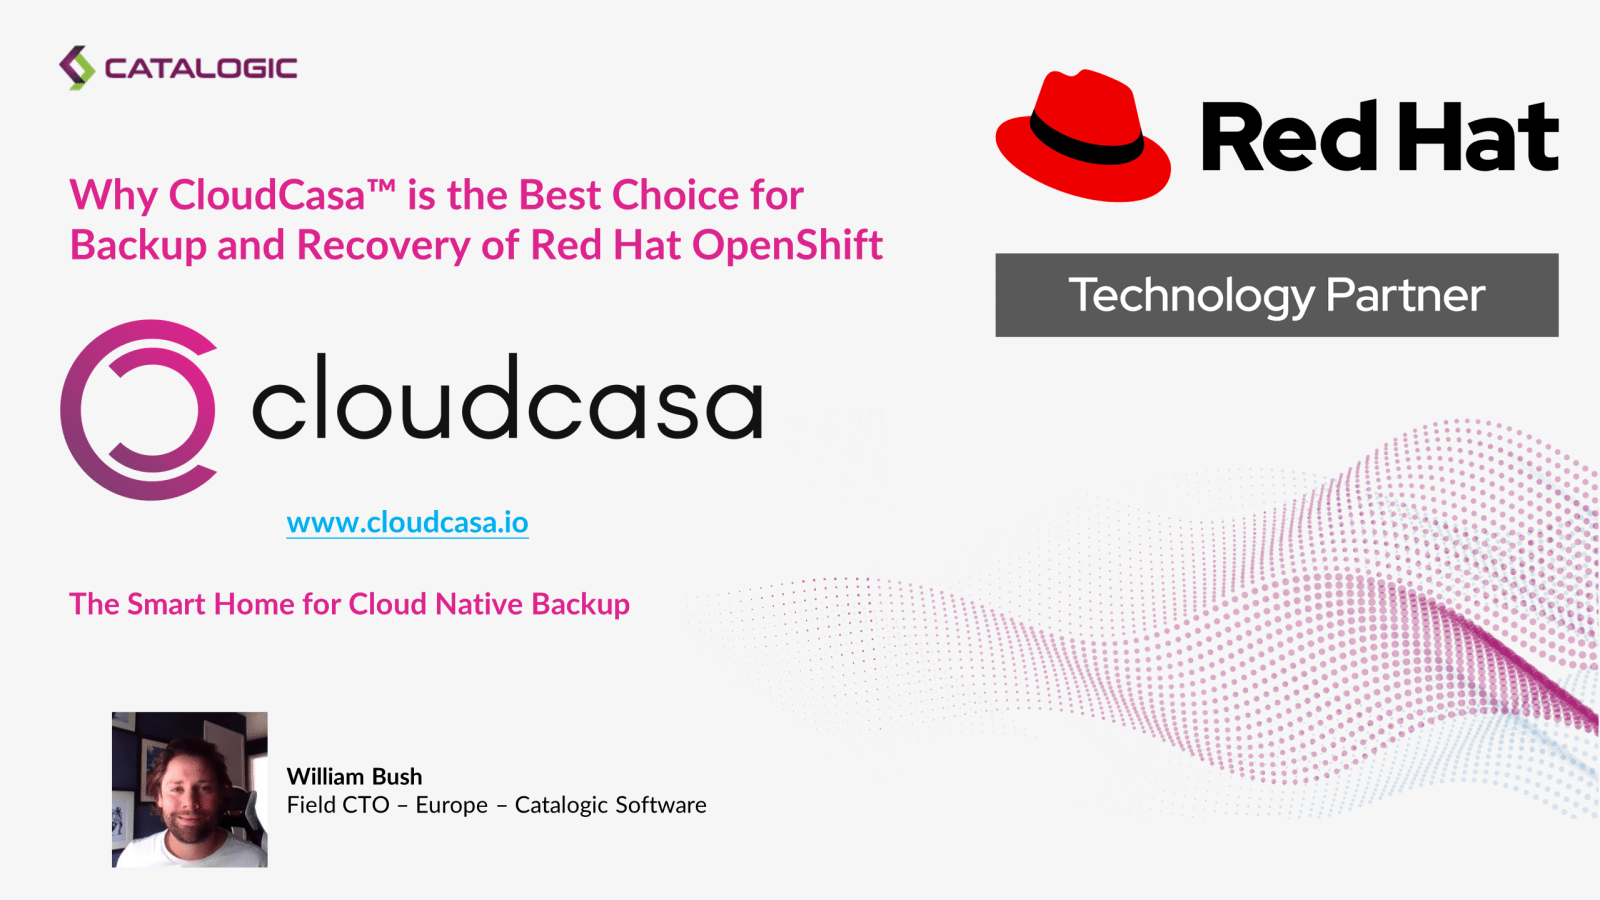 Why CloudCasa is the Best Choice for Backup and Recovery of Red Hat OpenShift